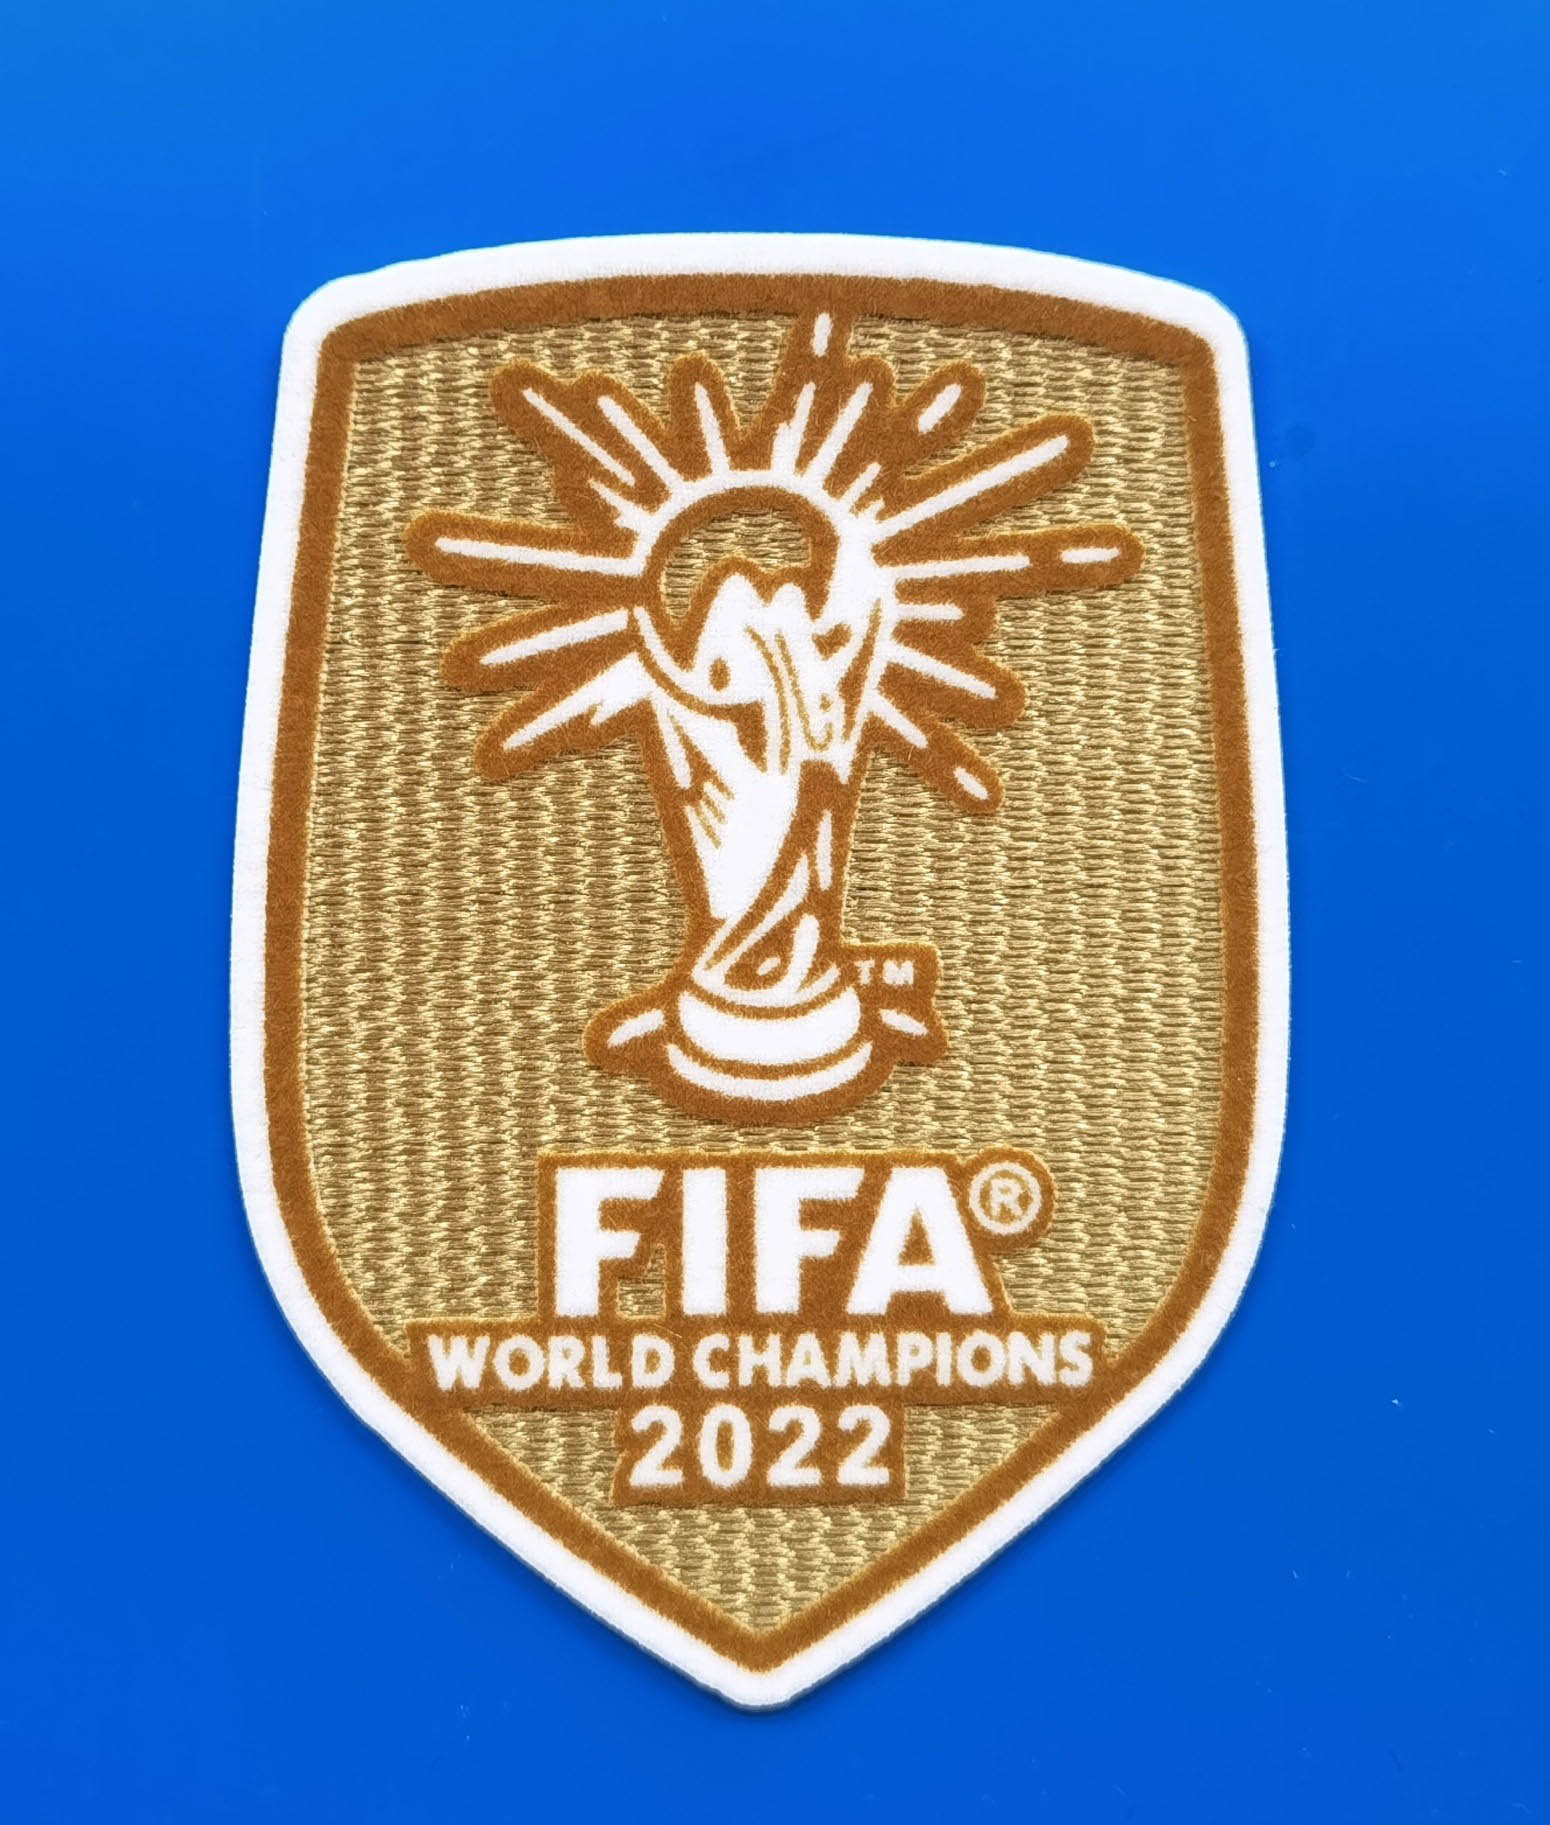 100% Official 2022 World Cup Winners Badge & Match Insignia Finally  Available - Footy Headlines